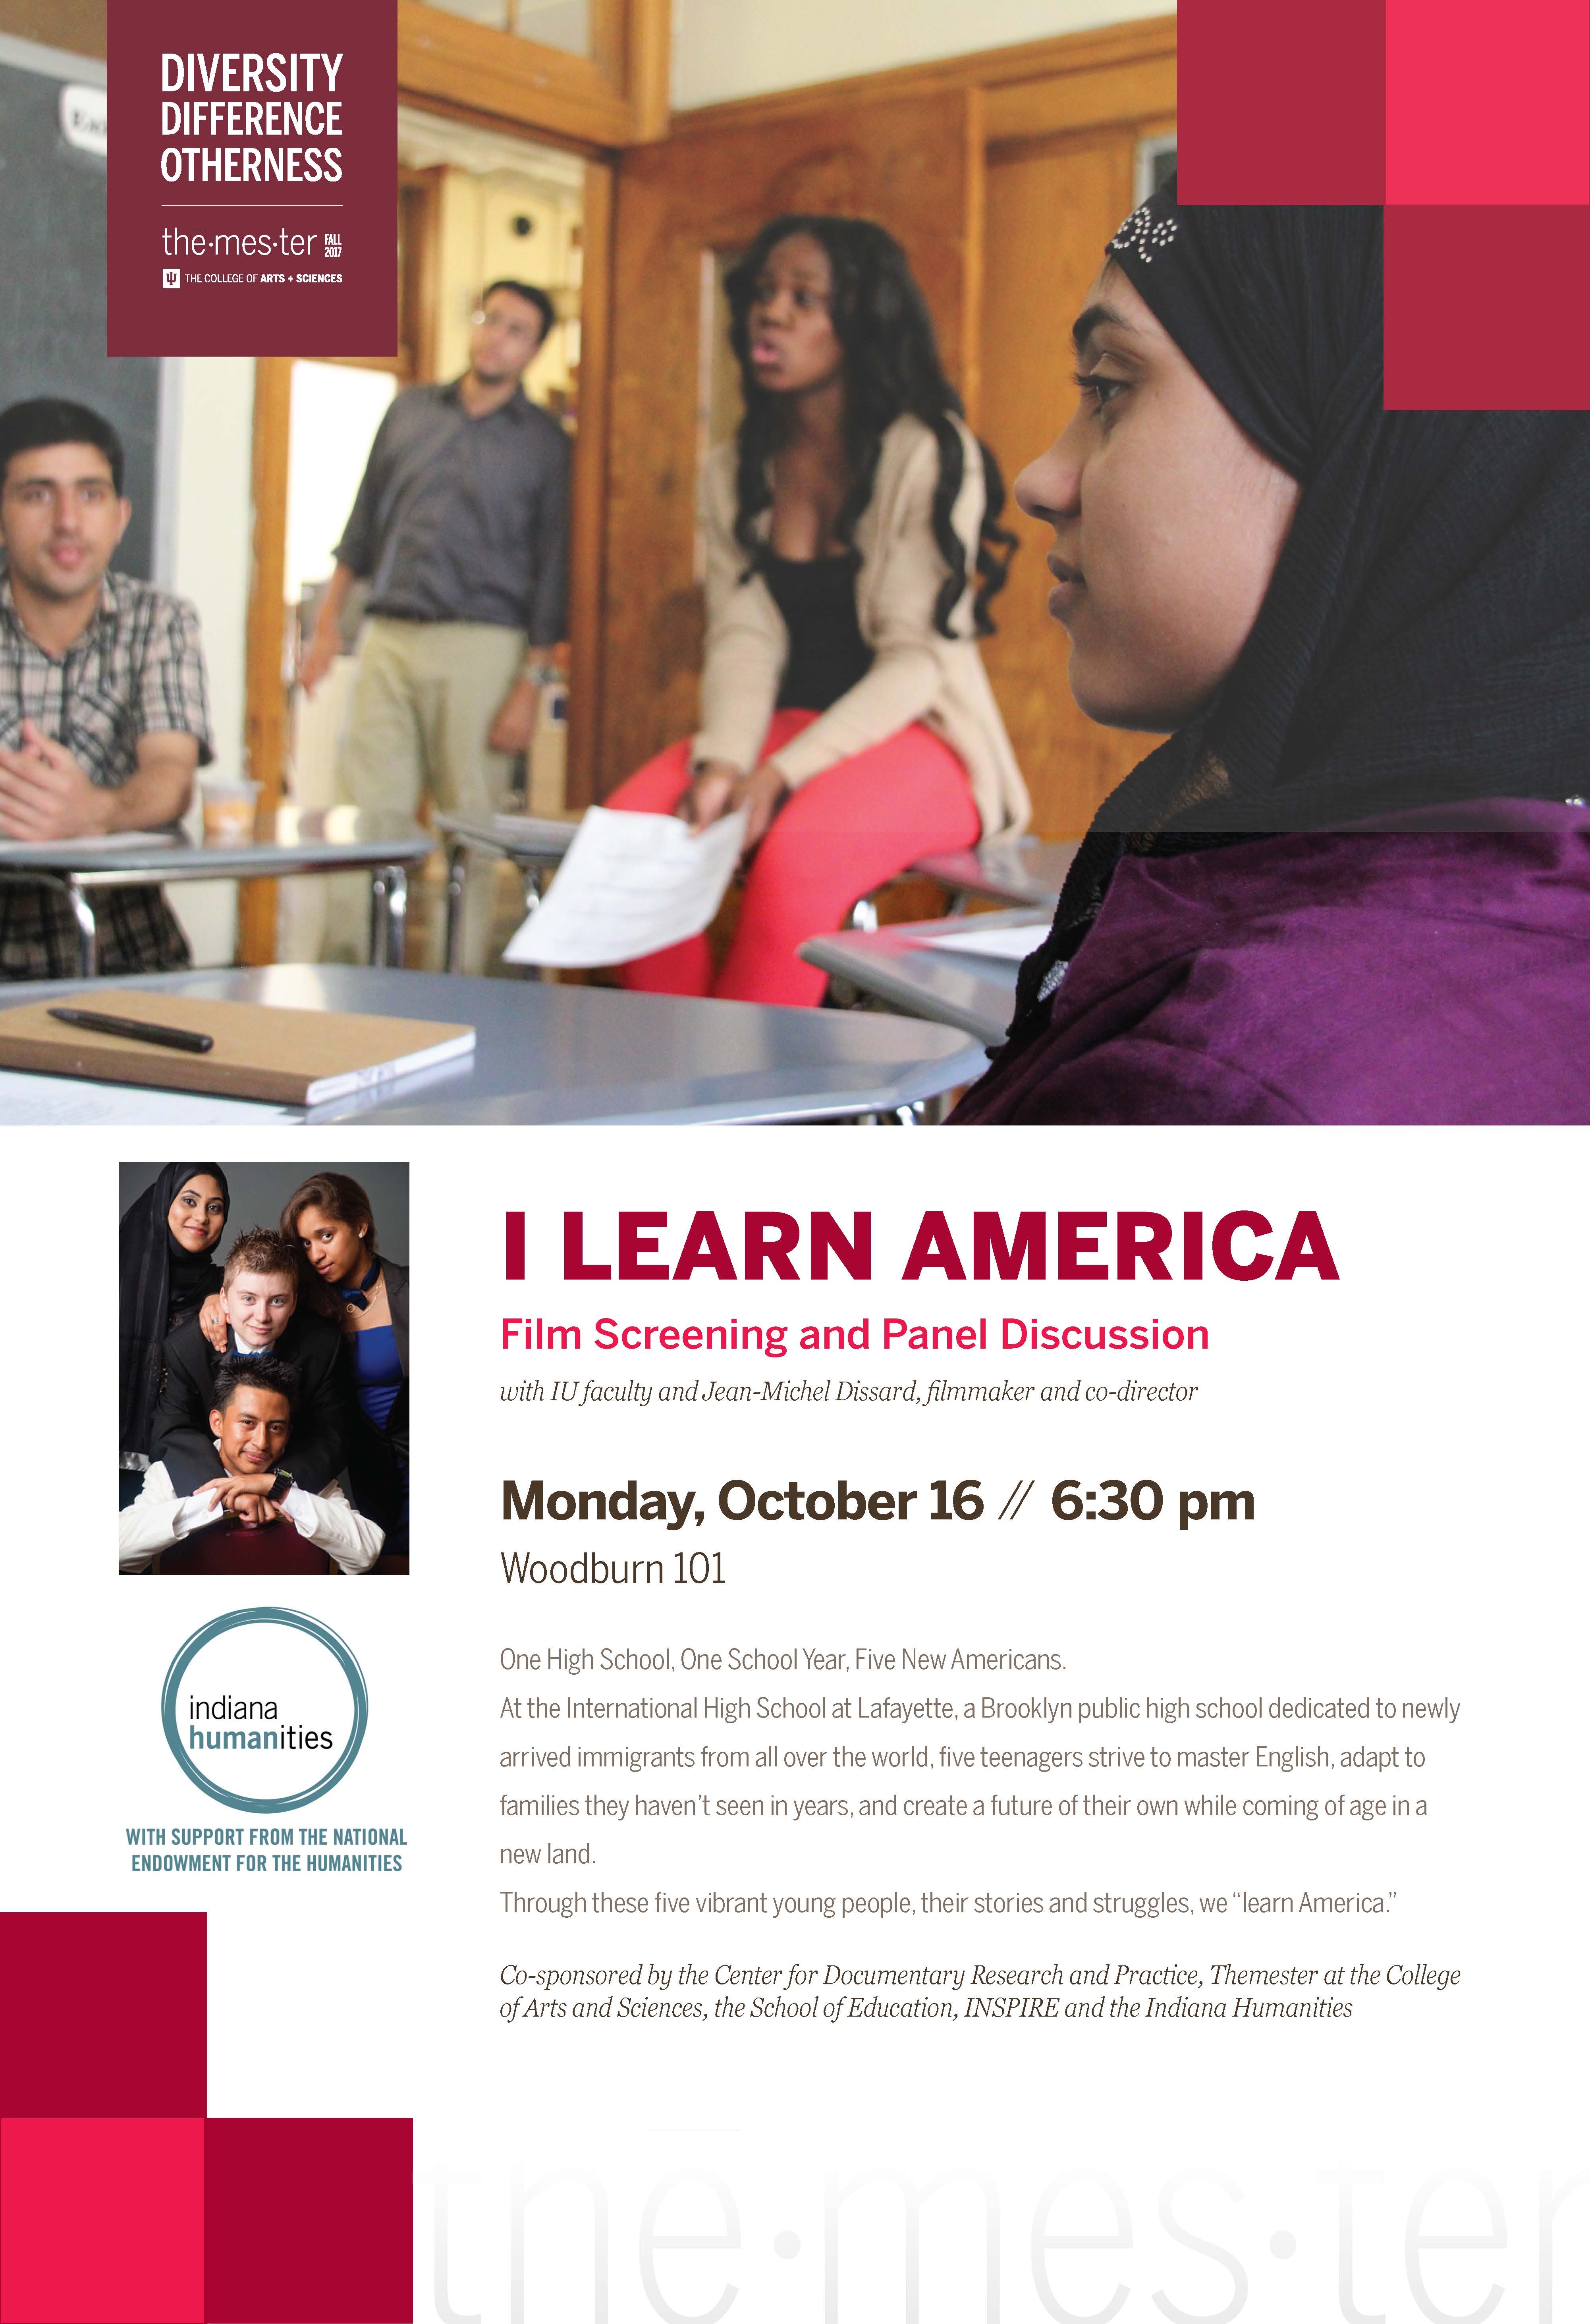 The poster for the "I Learn America" screening and discussion. Part of the "Diversity. Difference. Otherness" Themester Fall 2017 program. Text reads: "I learn America. Film screening and panel discussion with IU faculty and Jean-Michel Dissard, filmmaker and co-director. Monday, October 16 // 6:30 pm, Woodburn 101. One High School, One School Year, Five New Americans. At the International High School at Lafayette, a Brooklyn public high school dedicated to newly arrived immigrants from all over the world, five teenagers strive to master English, adapt to families they haven't seen in years, and create a future of their own while coming of age in a new land. Through these five vibrant young people, their stories and struggles, we 'learn America.' Co-sponsored by the Center for Documentary Research and Practice, Themester at the College of Arts and Sciences, the School of Education, INSPIRE, and the Indiana Humanities."